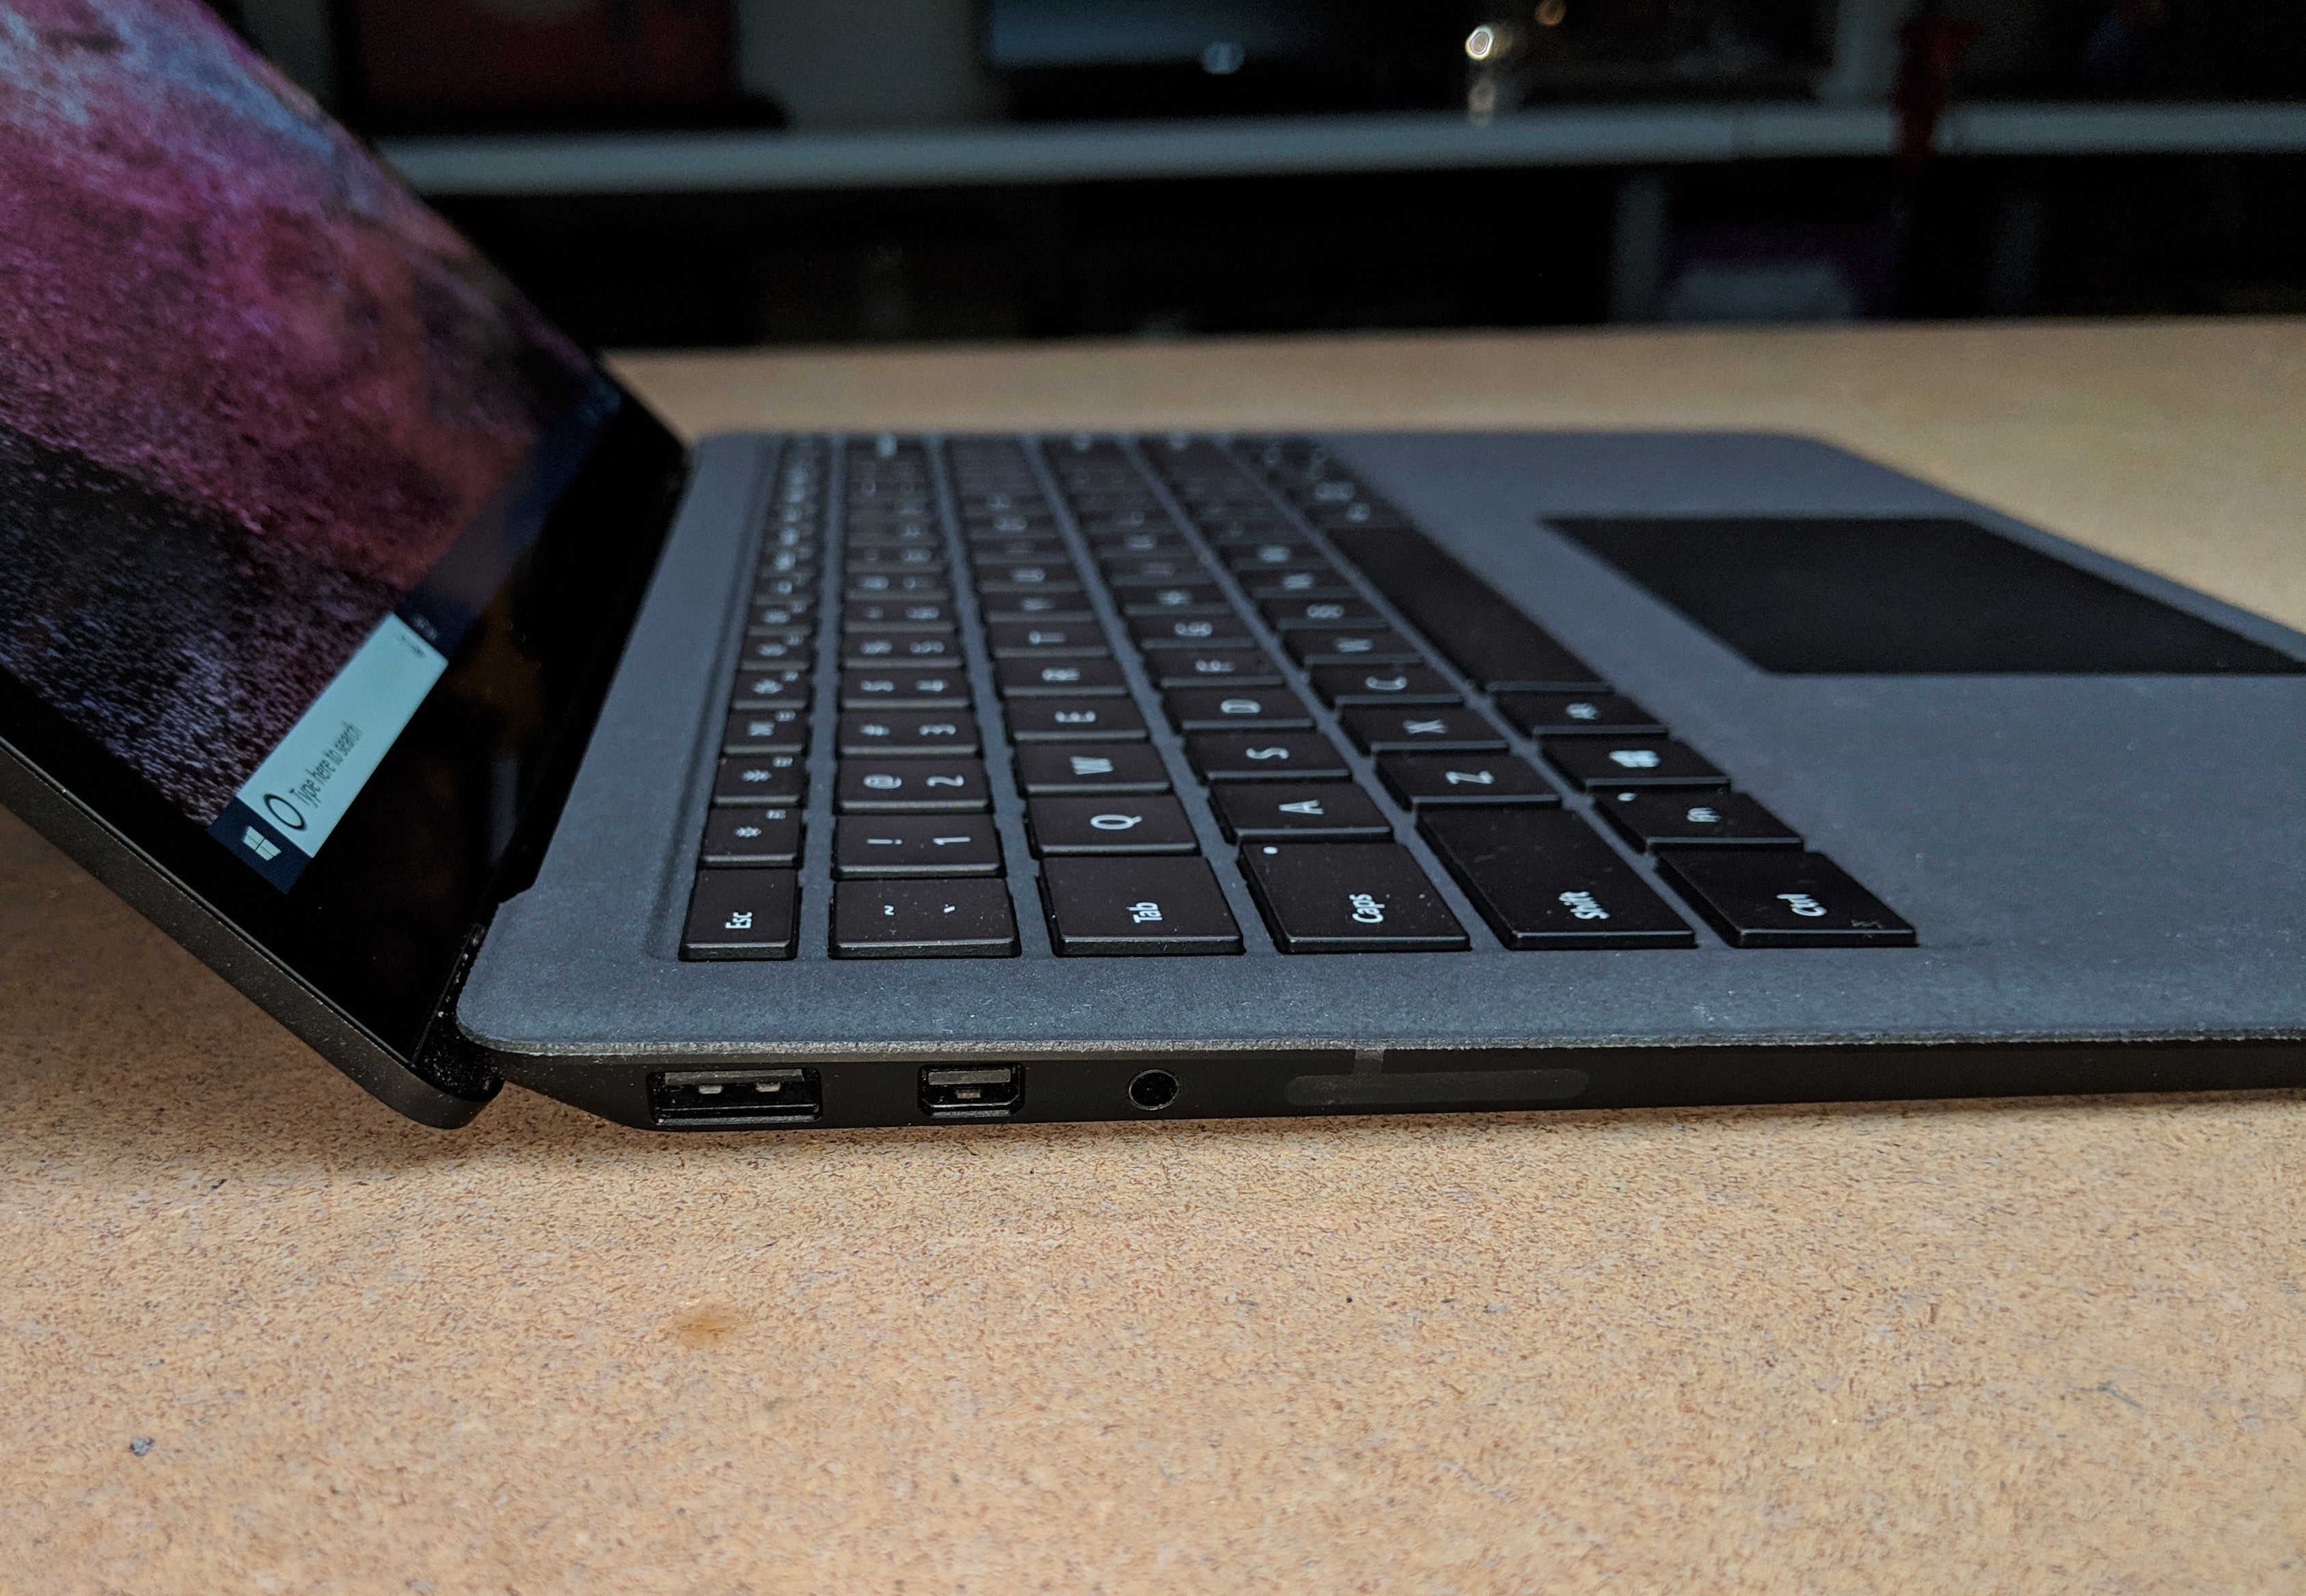 microsoft surface laptop go review